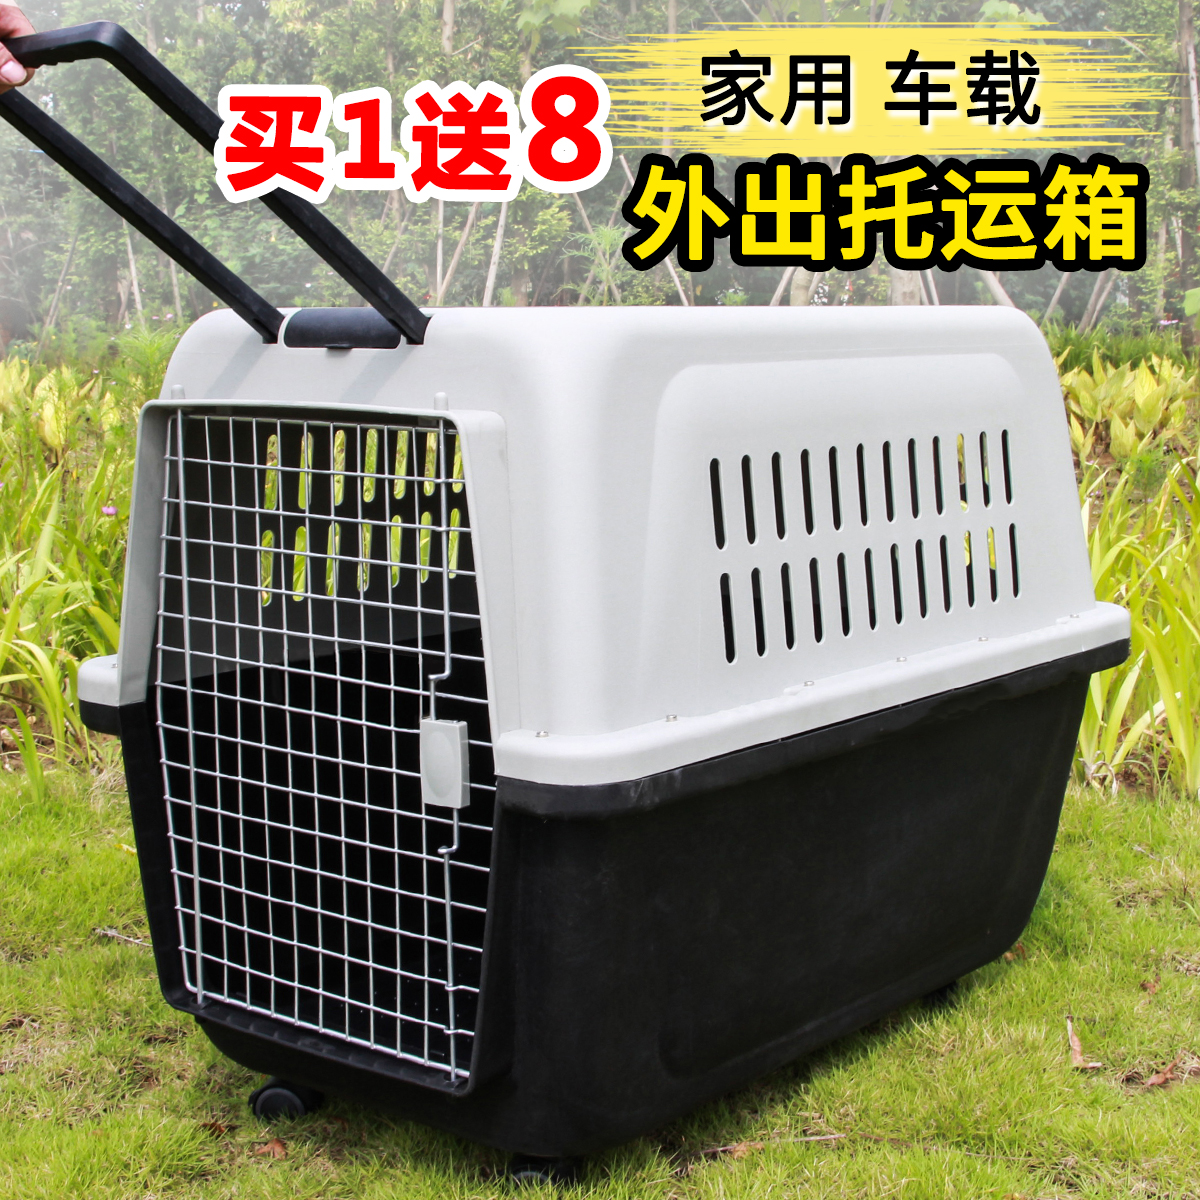 Pet Airbox Dog Cat Cage Cats Out Portable Special Large Dog No. Golden Hair Consignment Box Transport luggage case